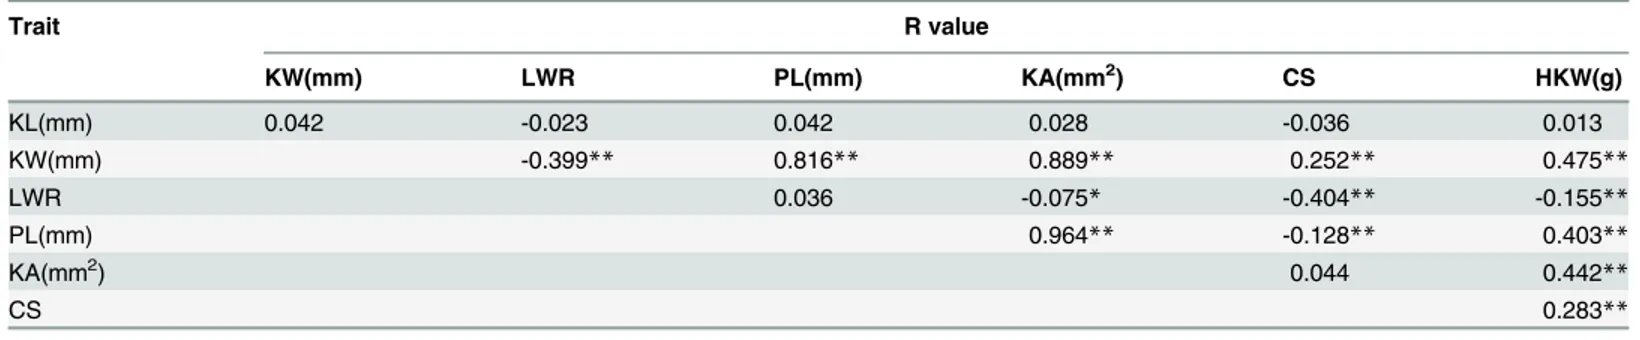 Table 3. The Pearson ’ s R correlation values among KSRTs, and between KSRTs and HKW.